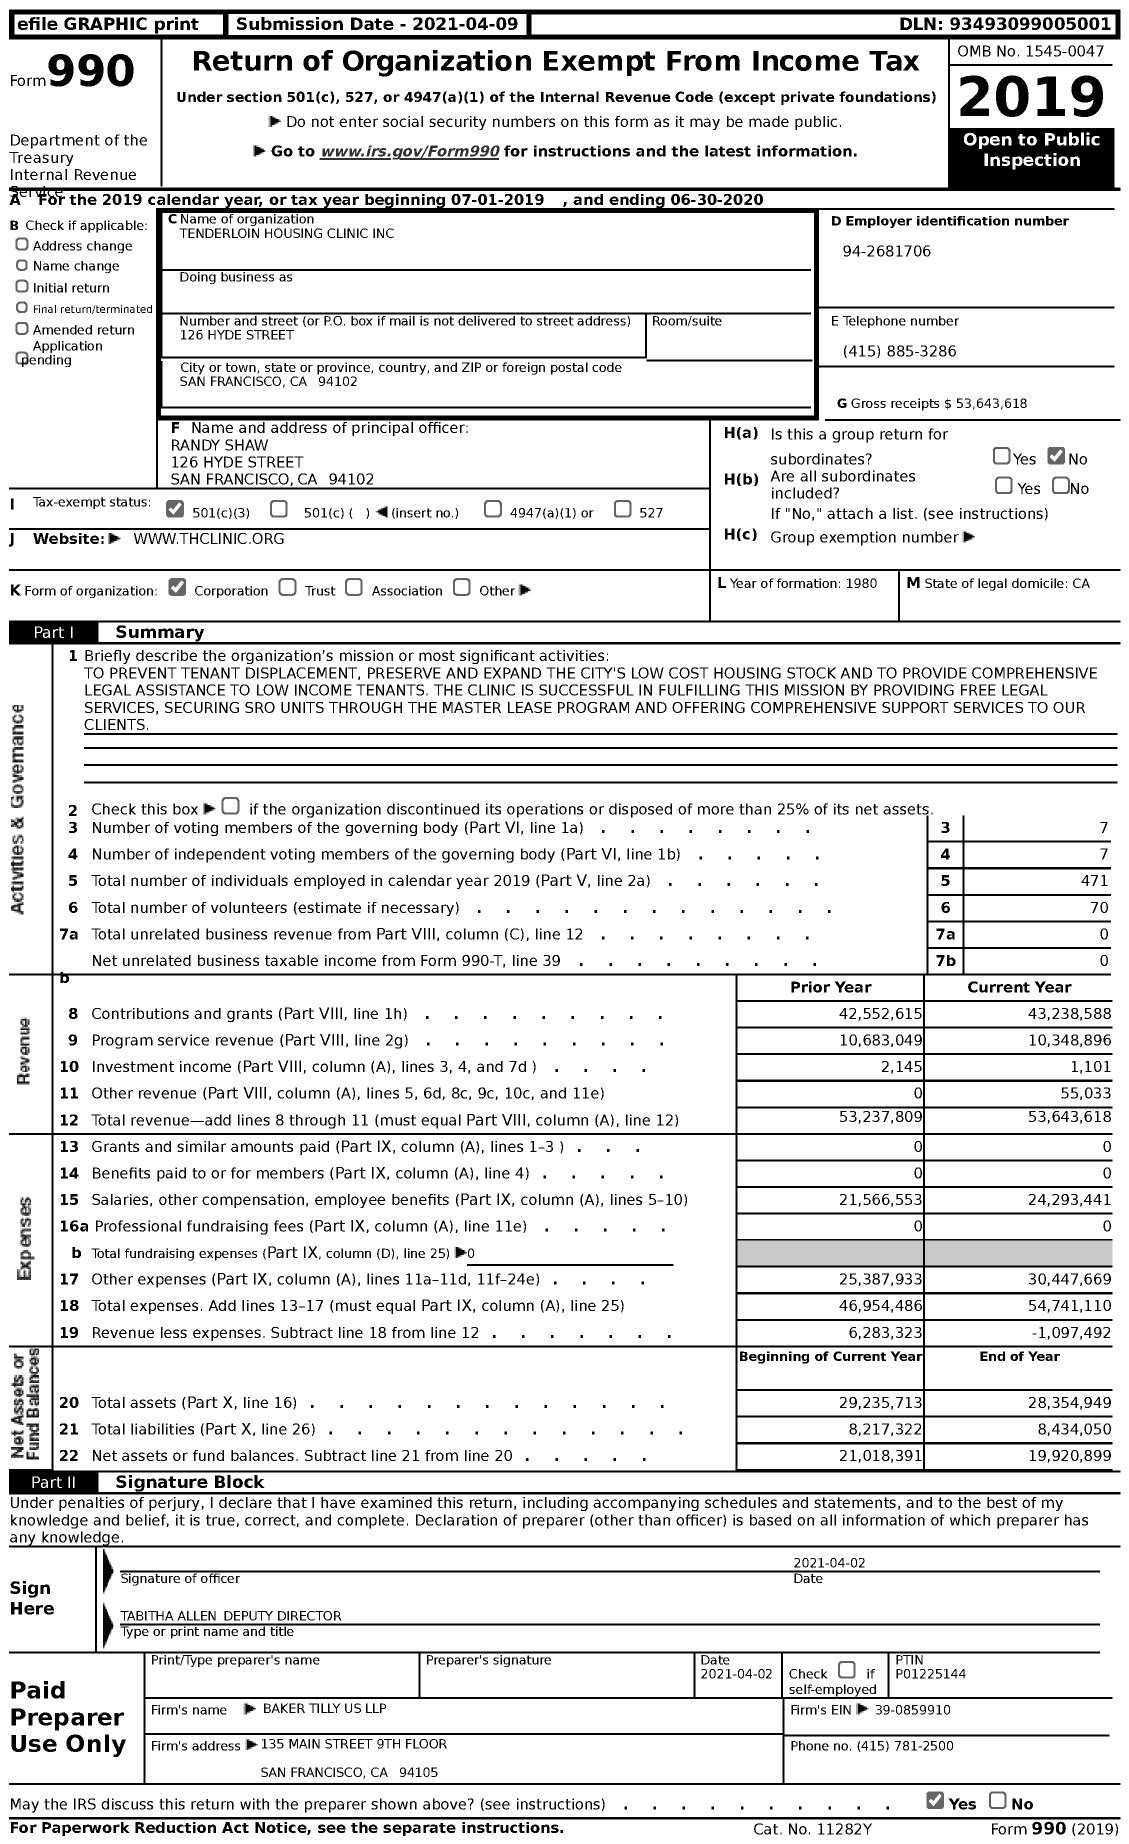 Image of first page of 2019 Form 990 for Tenderloin Housing Clinic (THC)